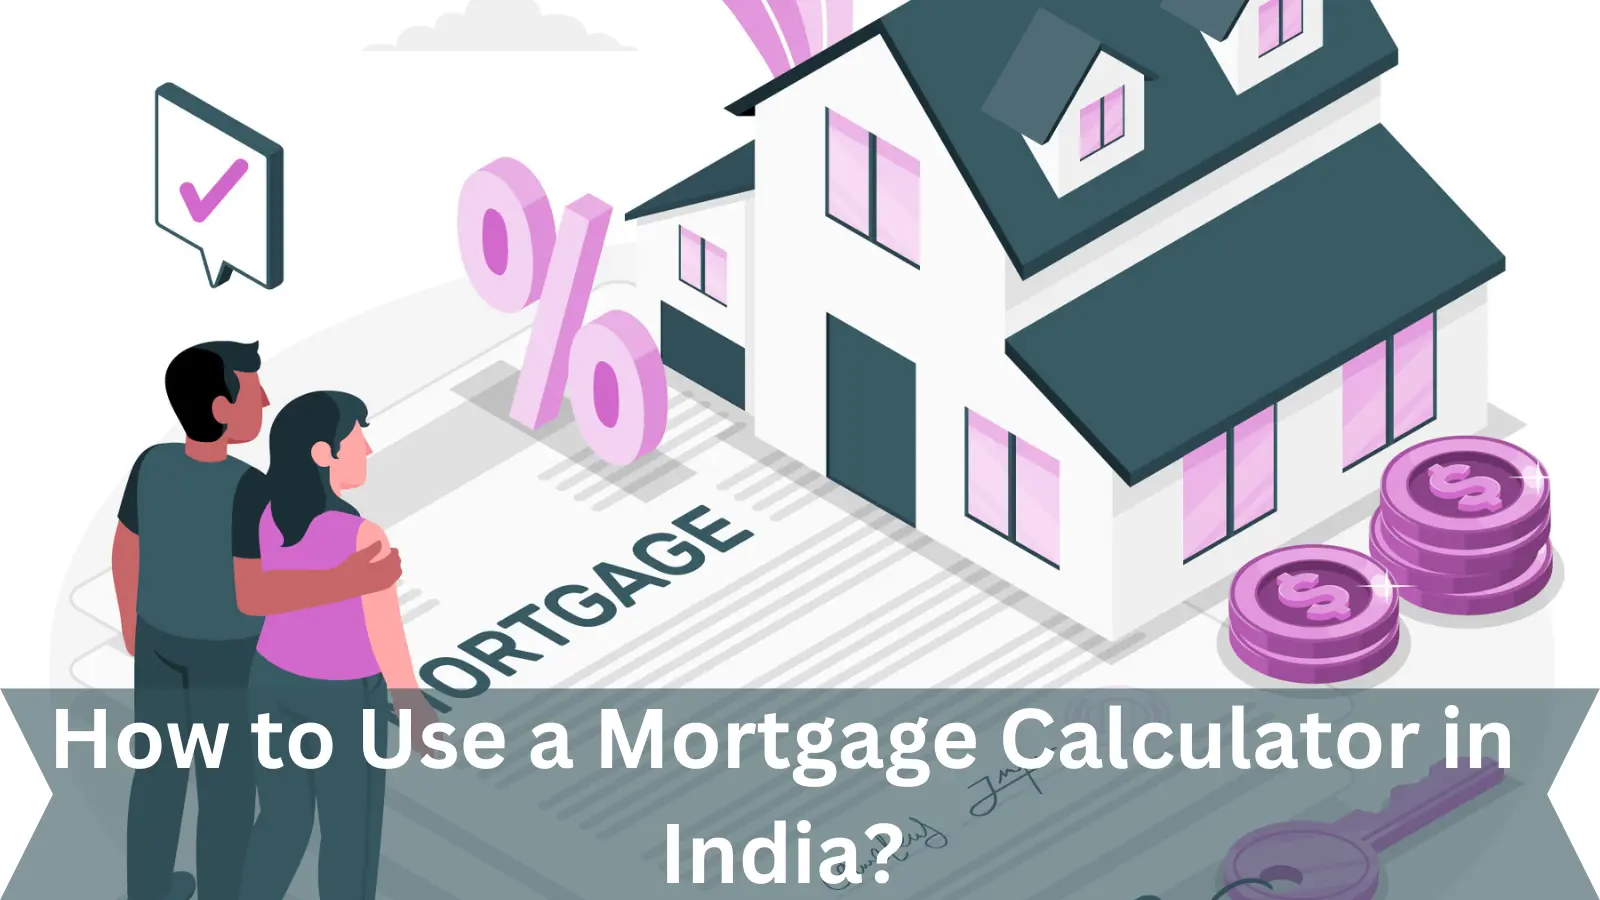 How To Use a Mortgage Calculator in India?